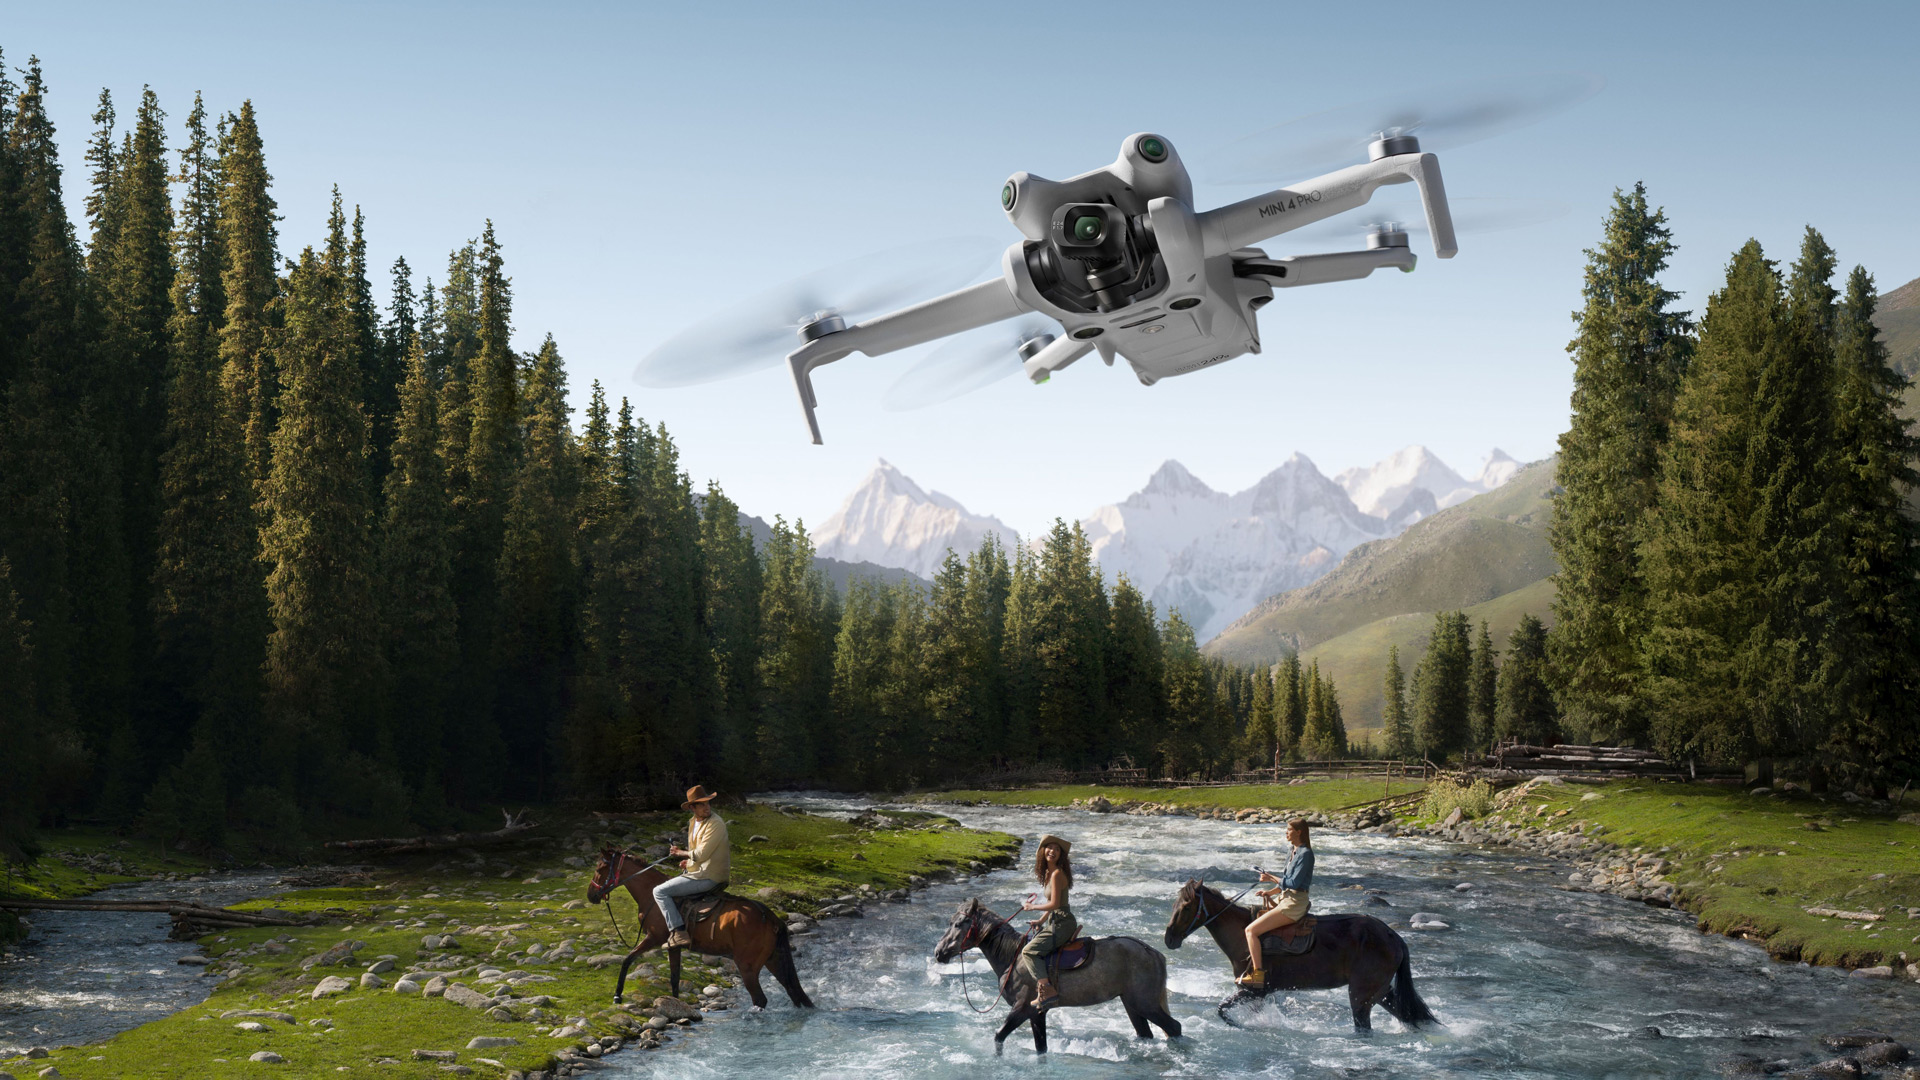 DJI Introduces Mini 4 Pro with Omnidirectional Vision, Extended Range